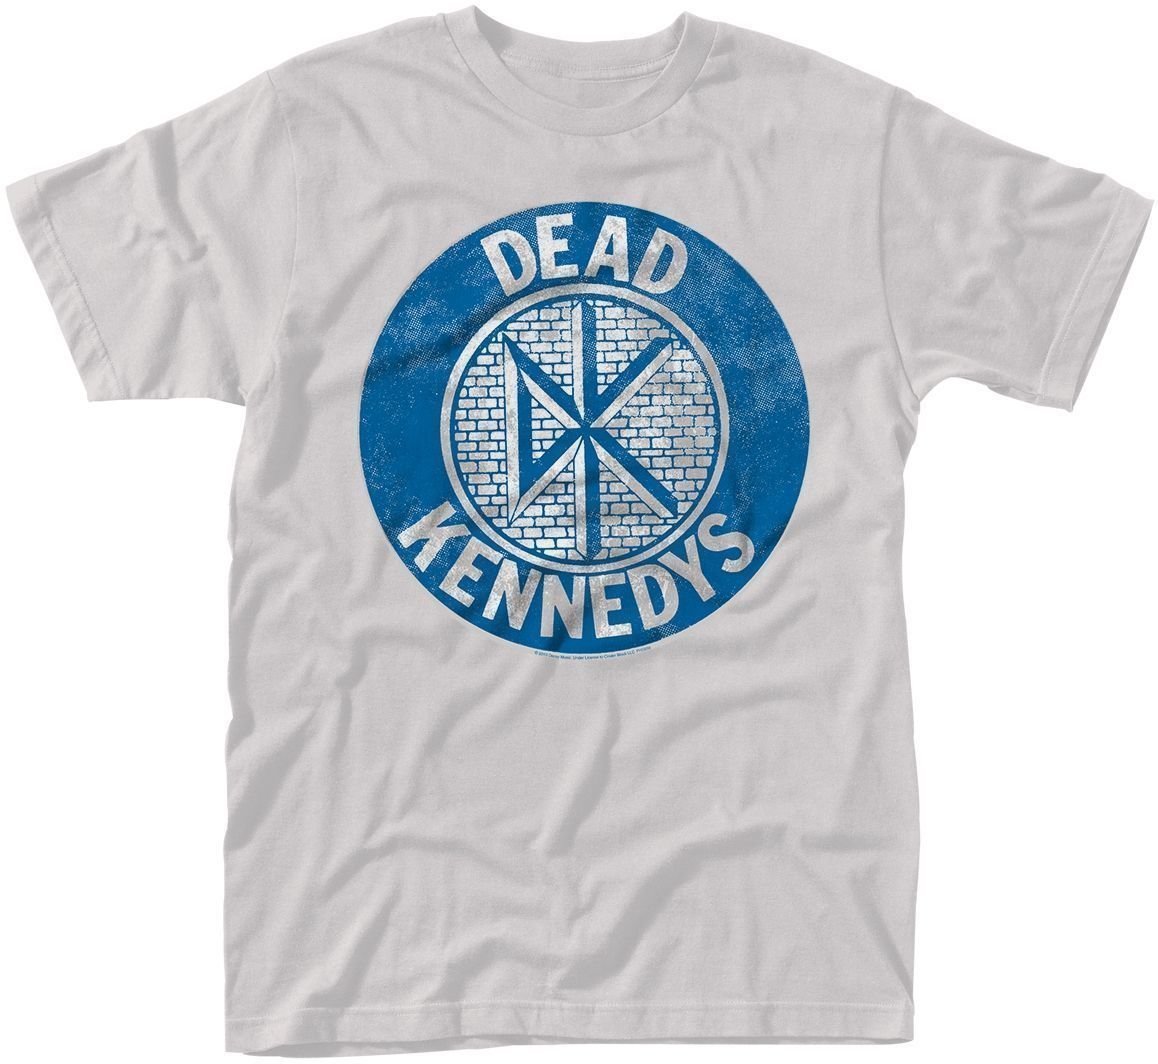 Shirt Dead Kennedys Shirt Bedtime For Democracy White XL